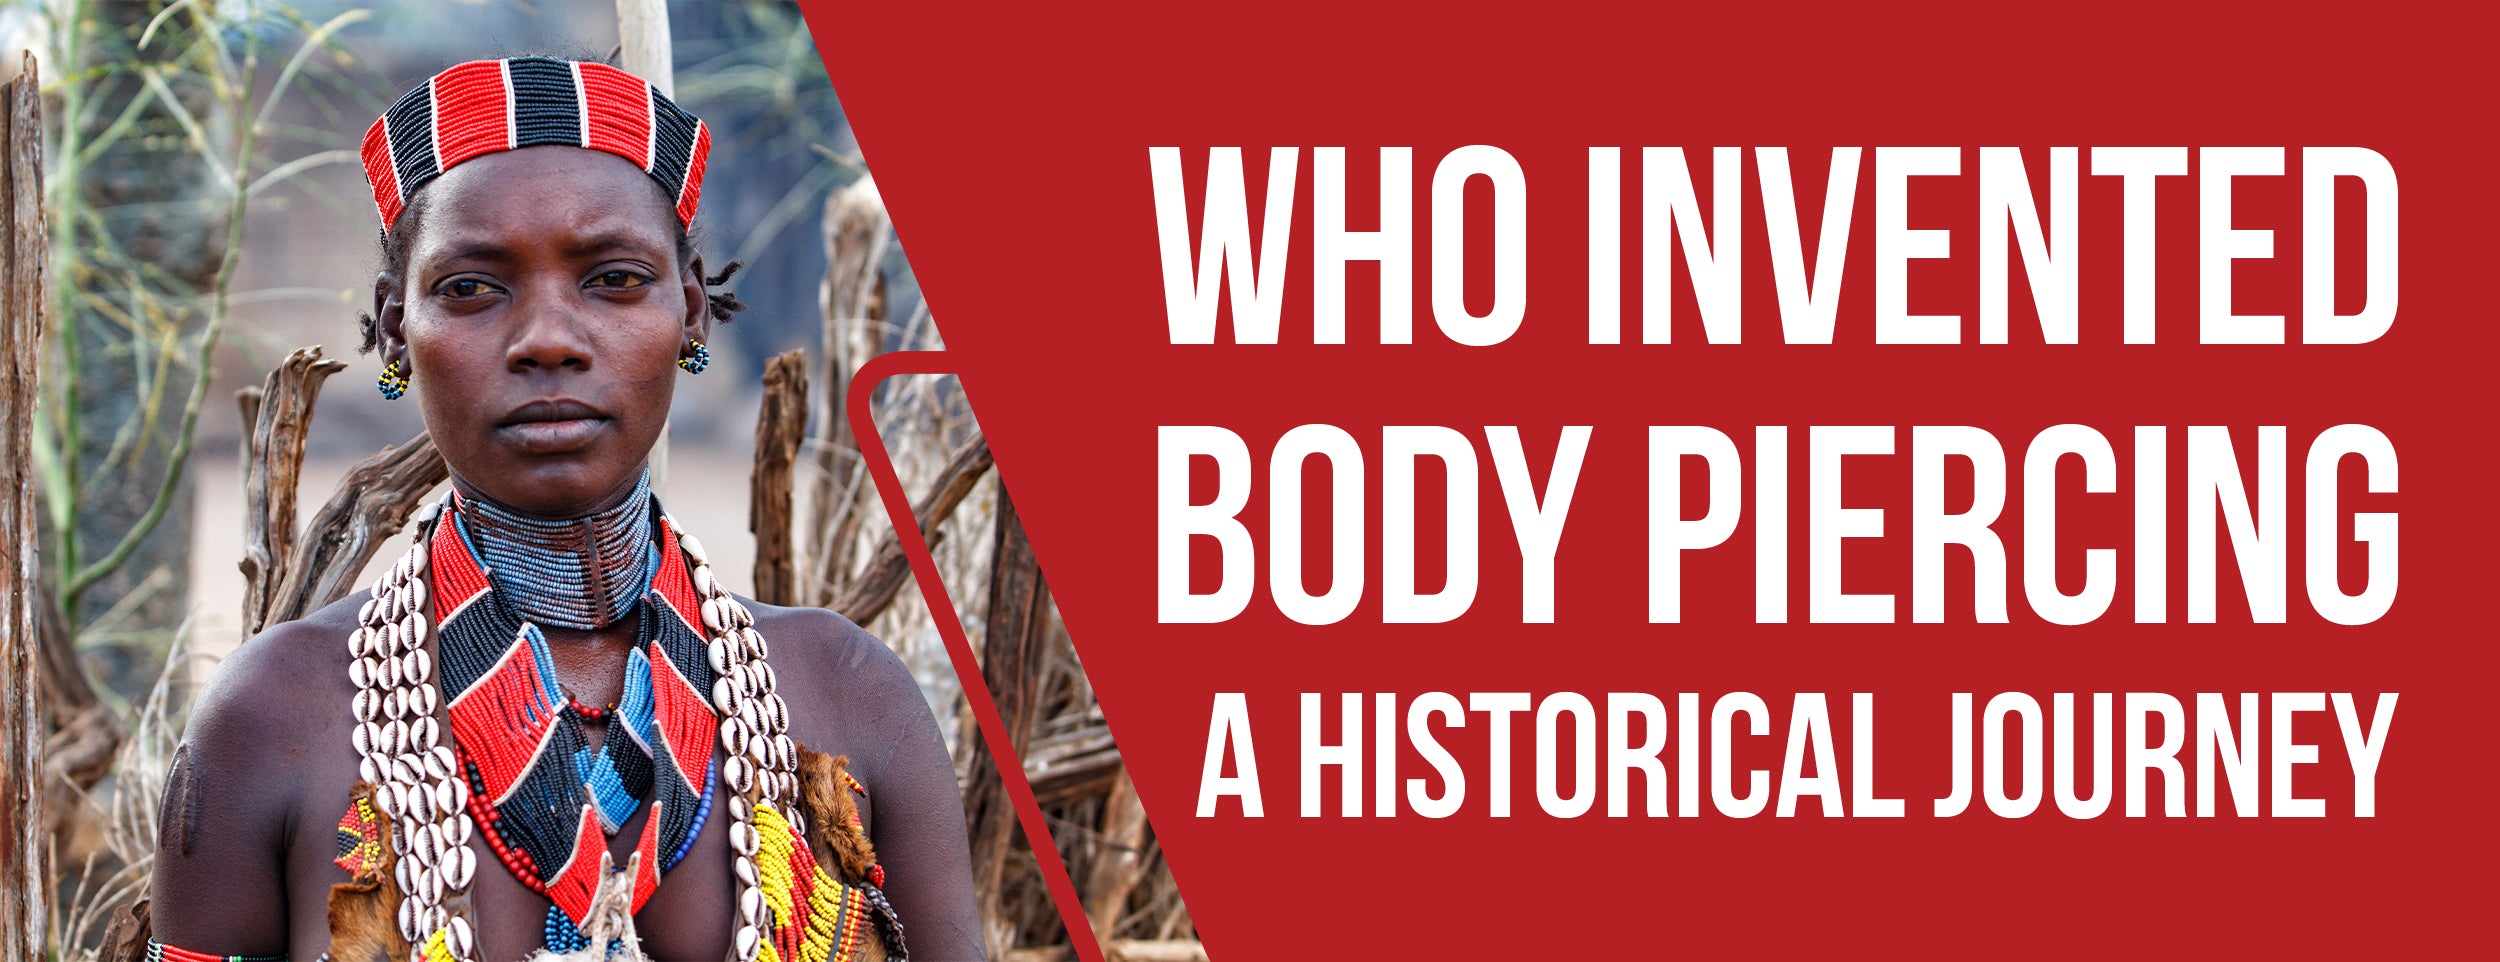 A historical journey into who invented body piercing